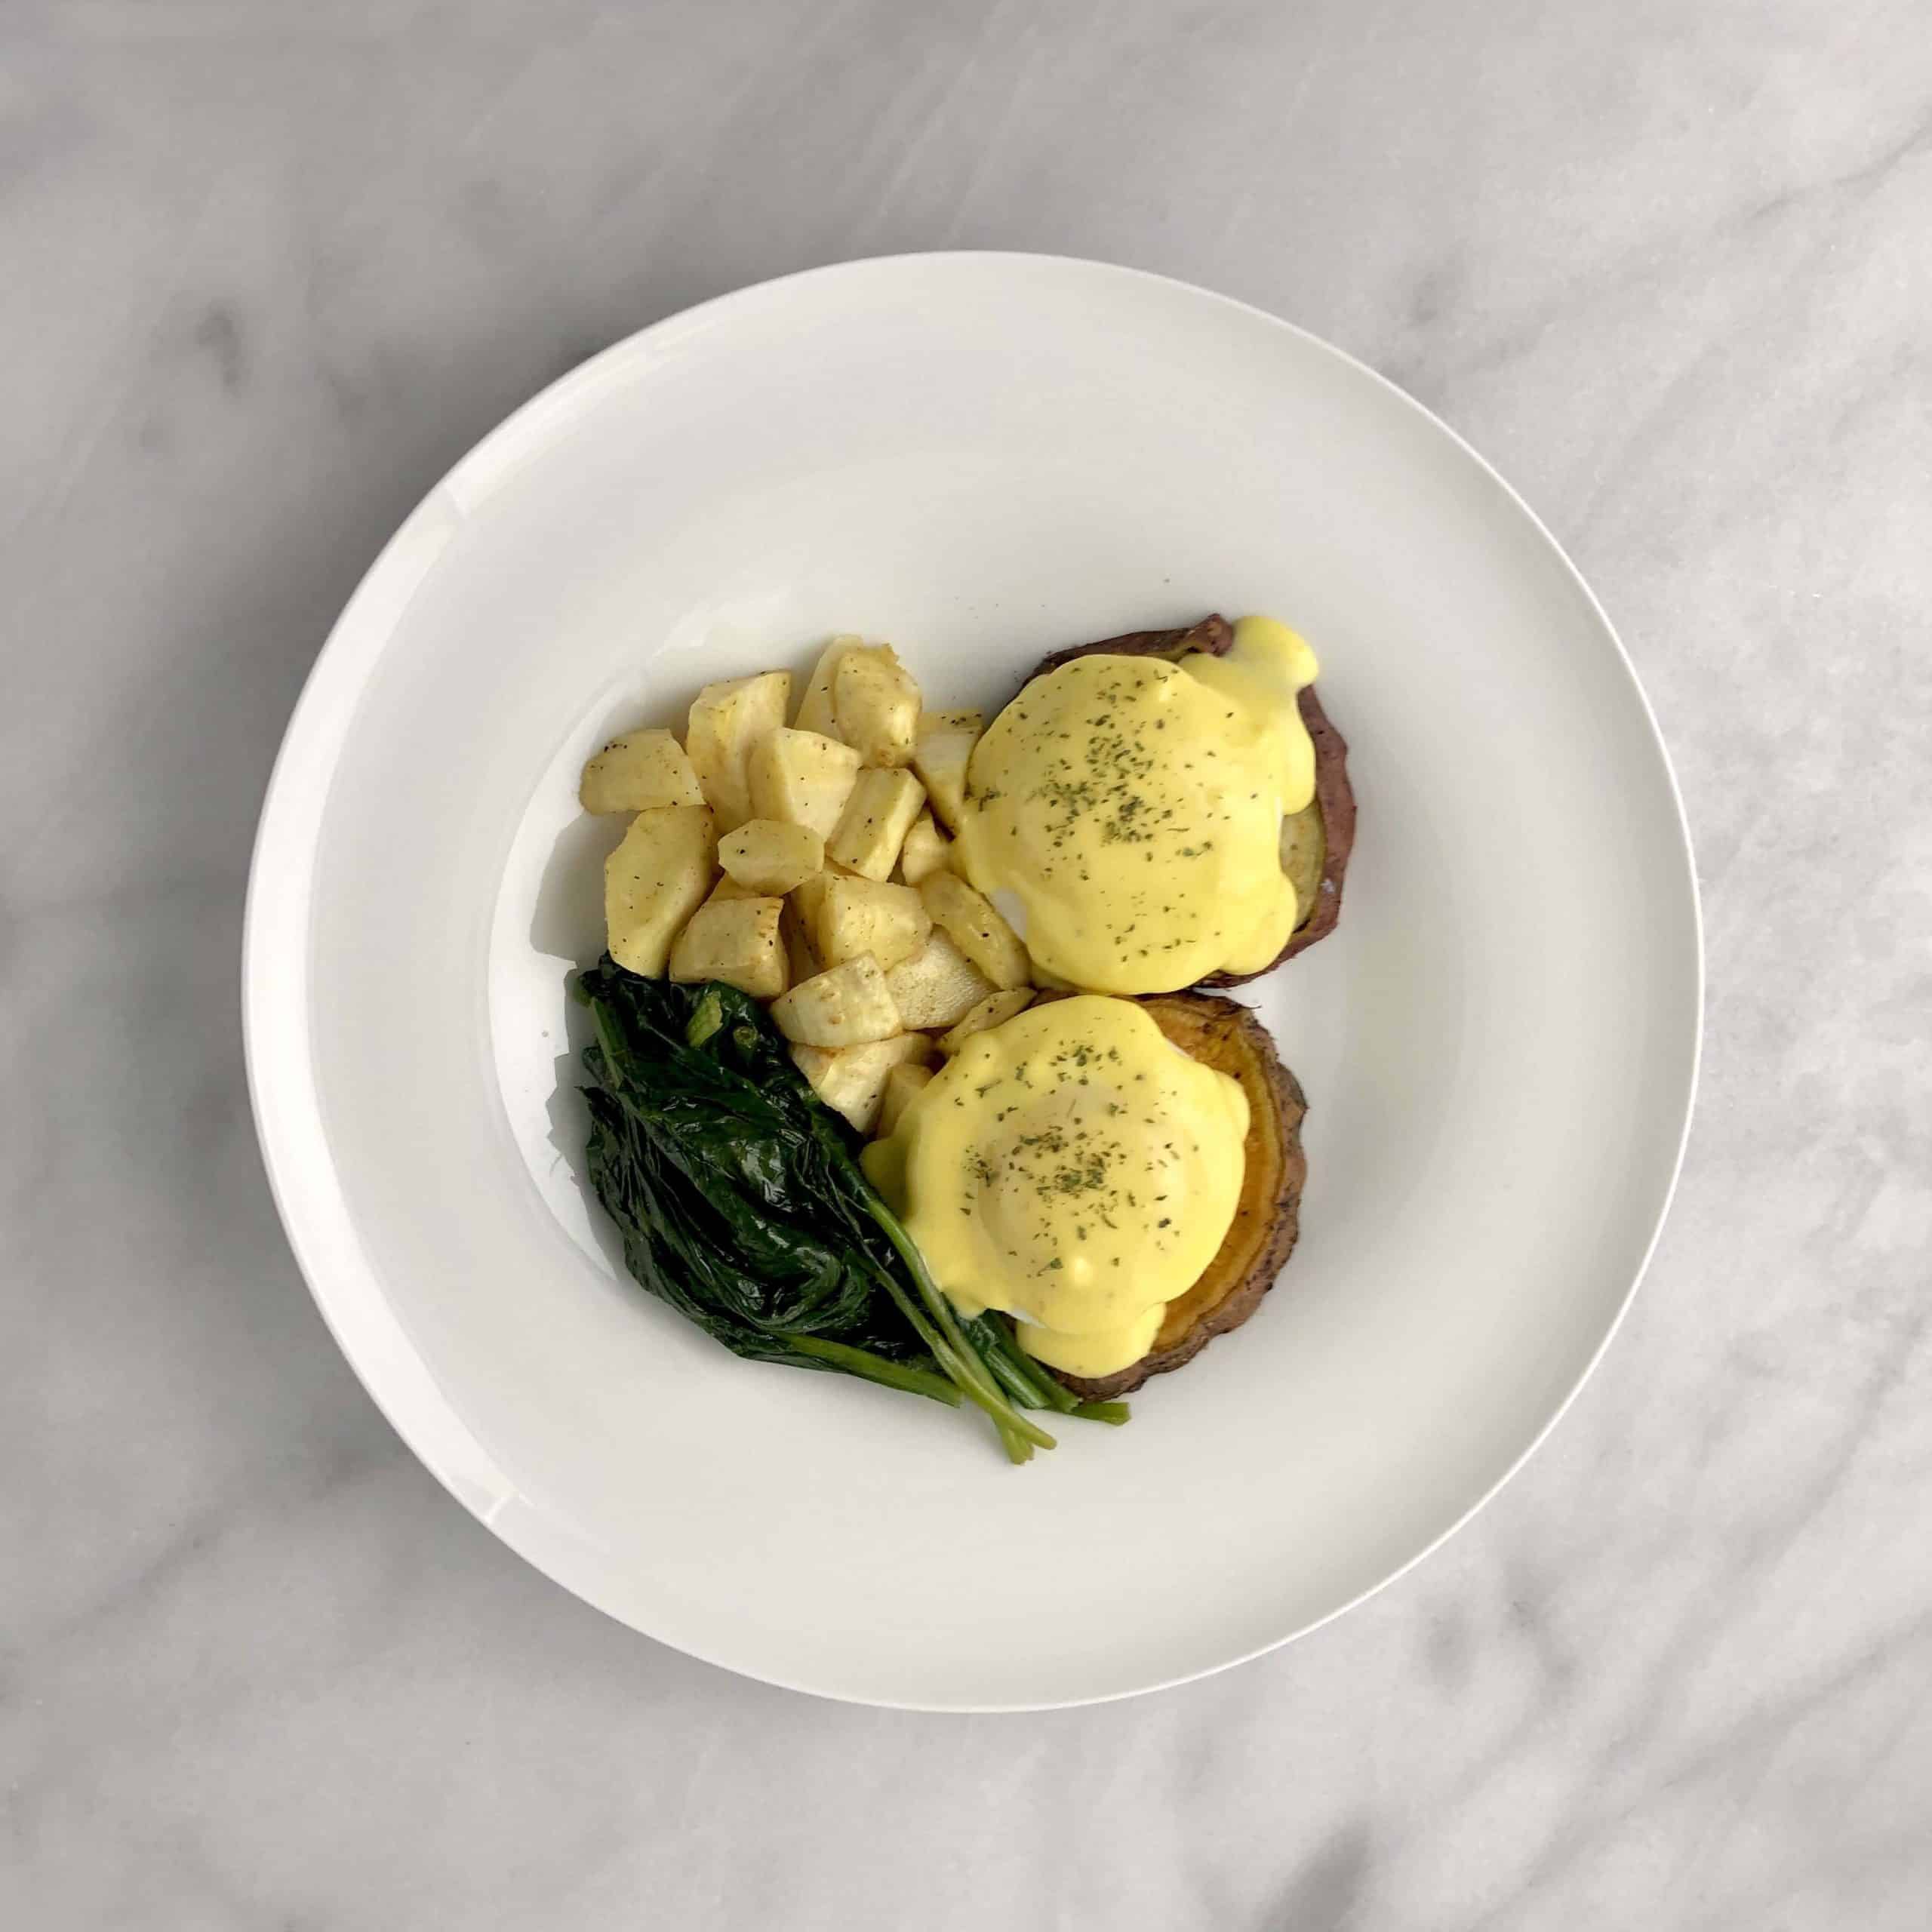 Eggs Benedict with Roasted Parsnips